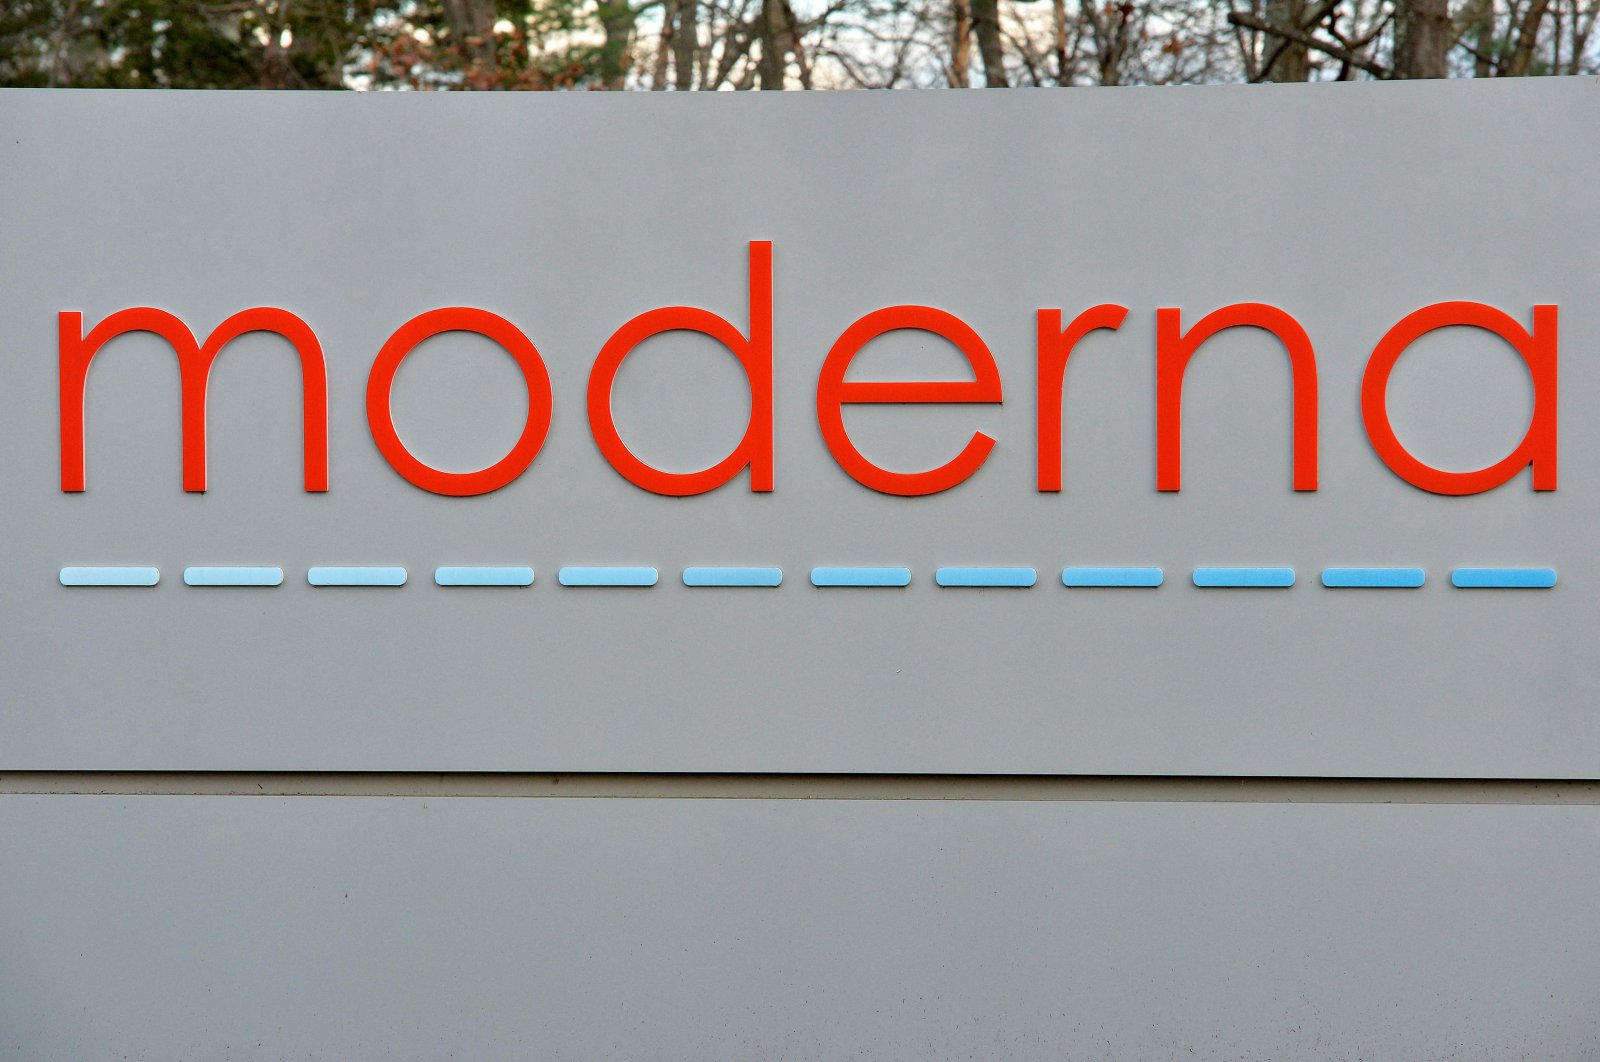 The Moderna logo is seen at the Moderna campus in Norwood, Massachusetts, U.S., Dec. 2, 2020. (AFP File Photo)